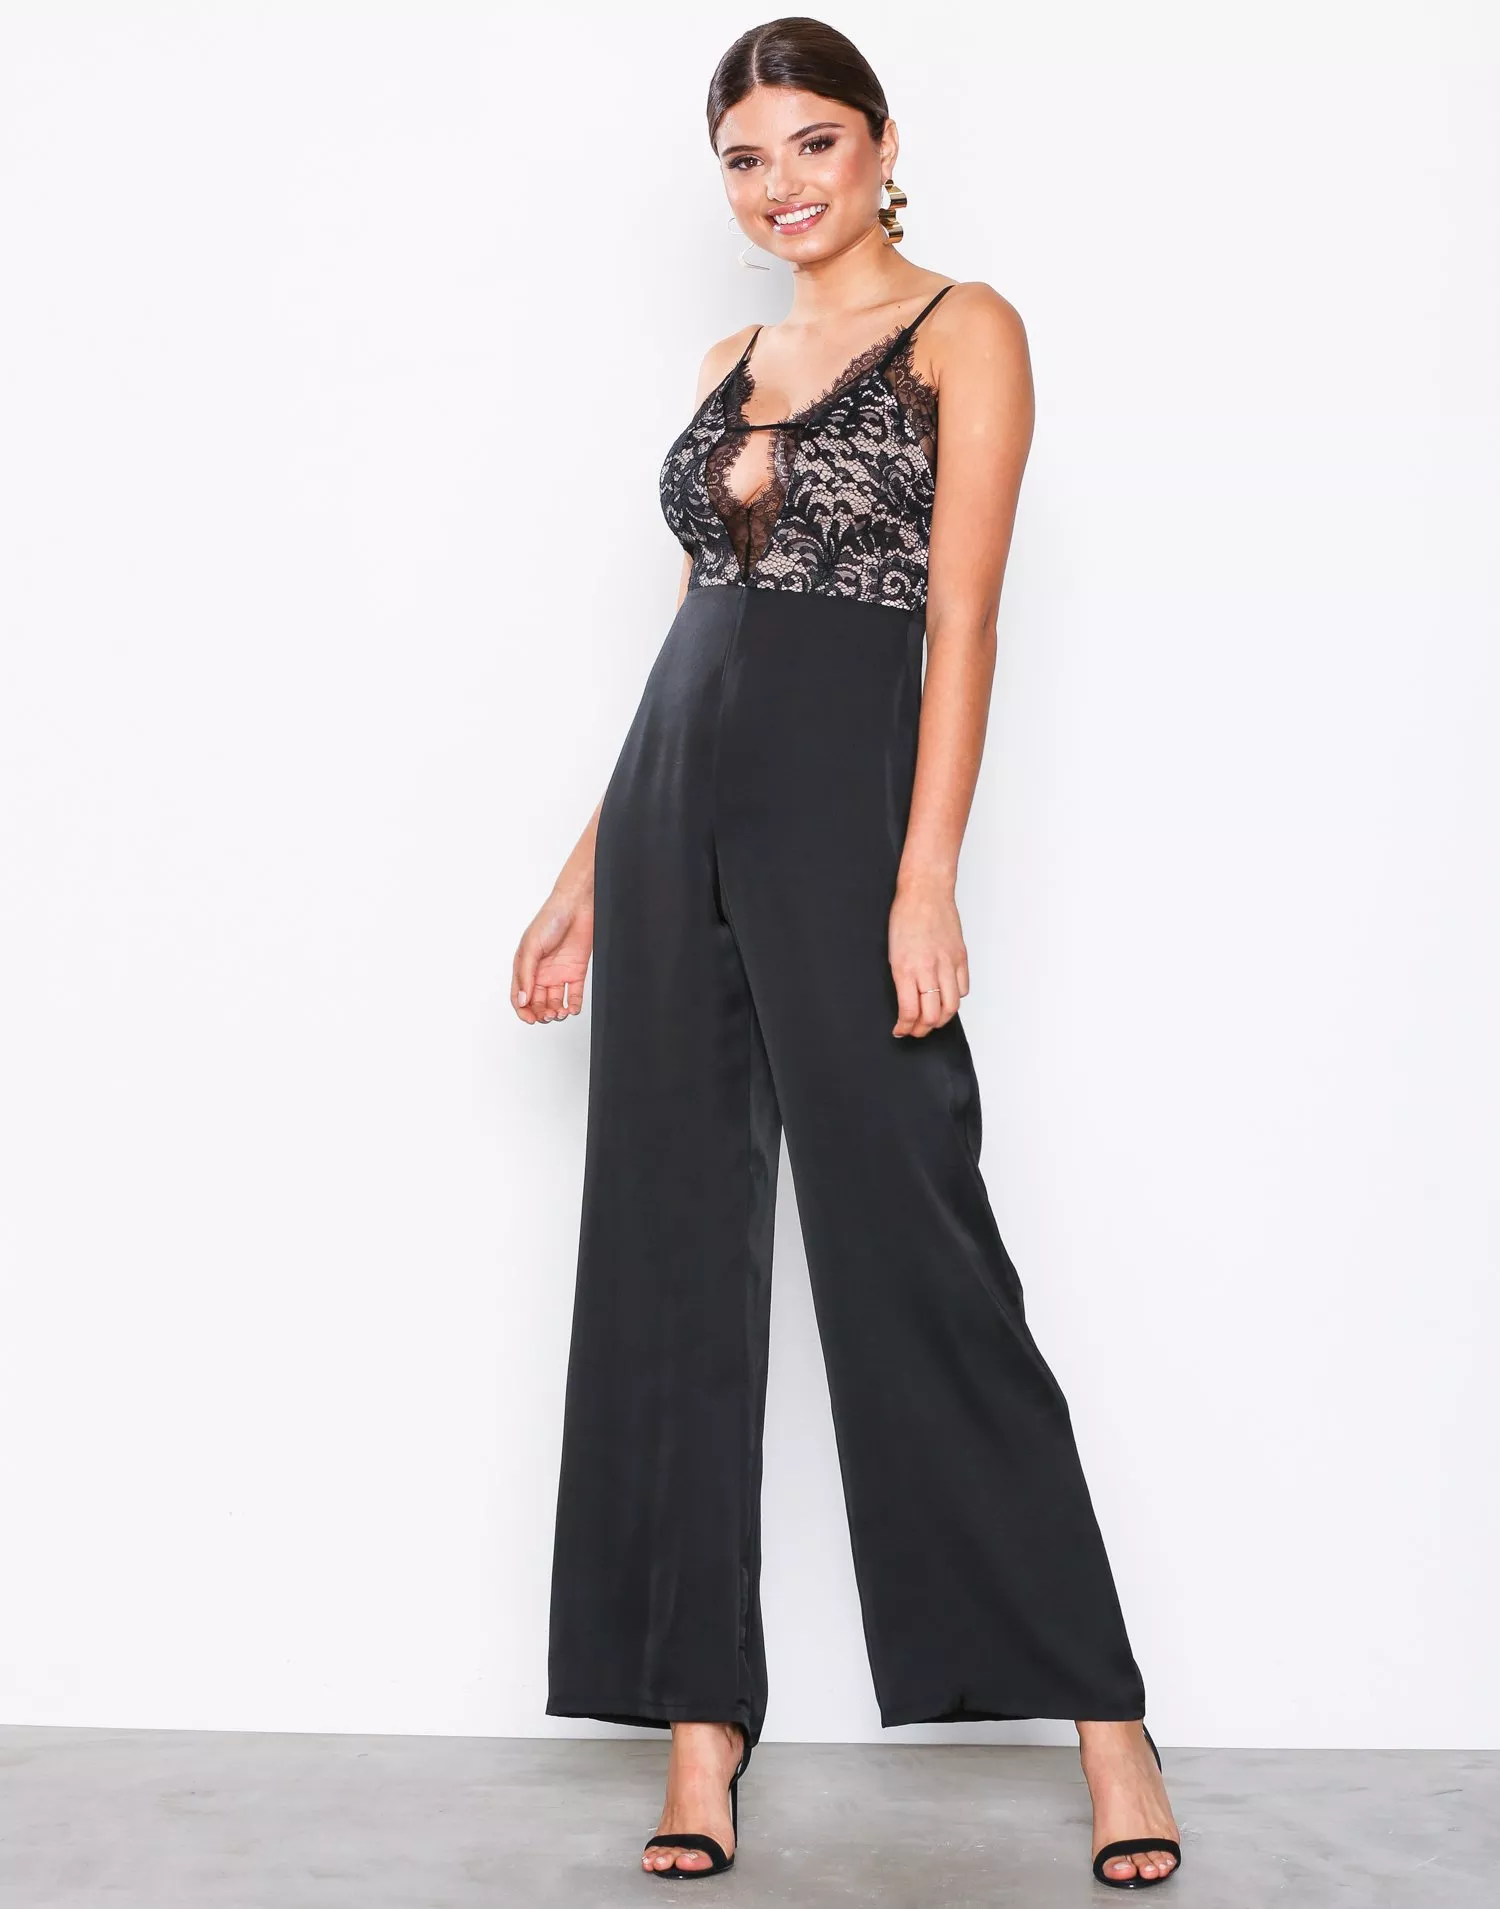 Booth Nysgerrighed syre Buy Missguided Strappy Lace Bar Detail Jumpsuit - Black | Nelly.com